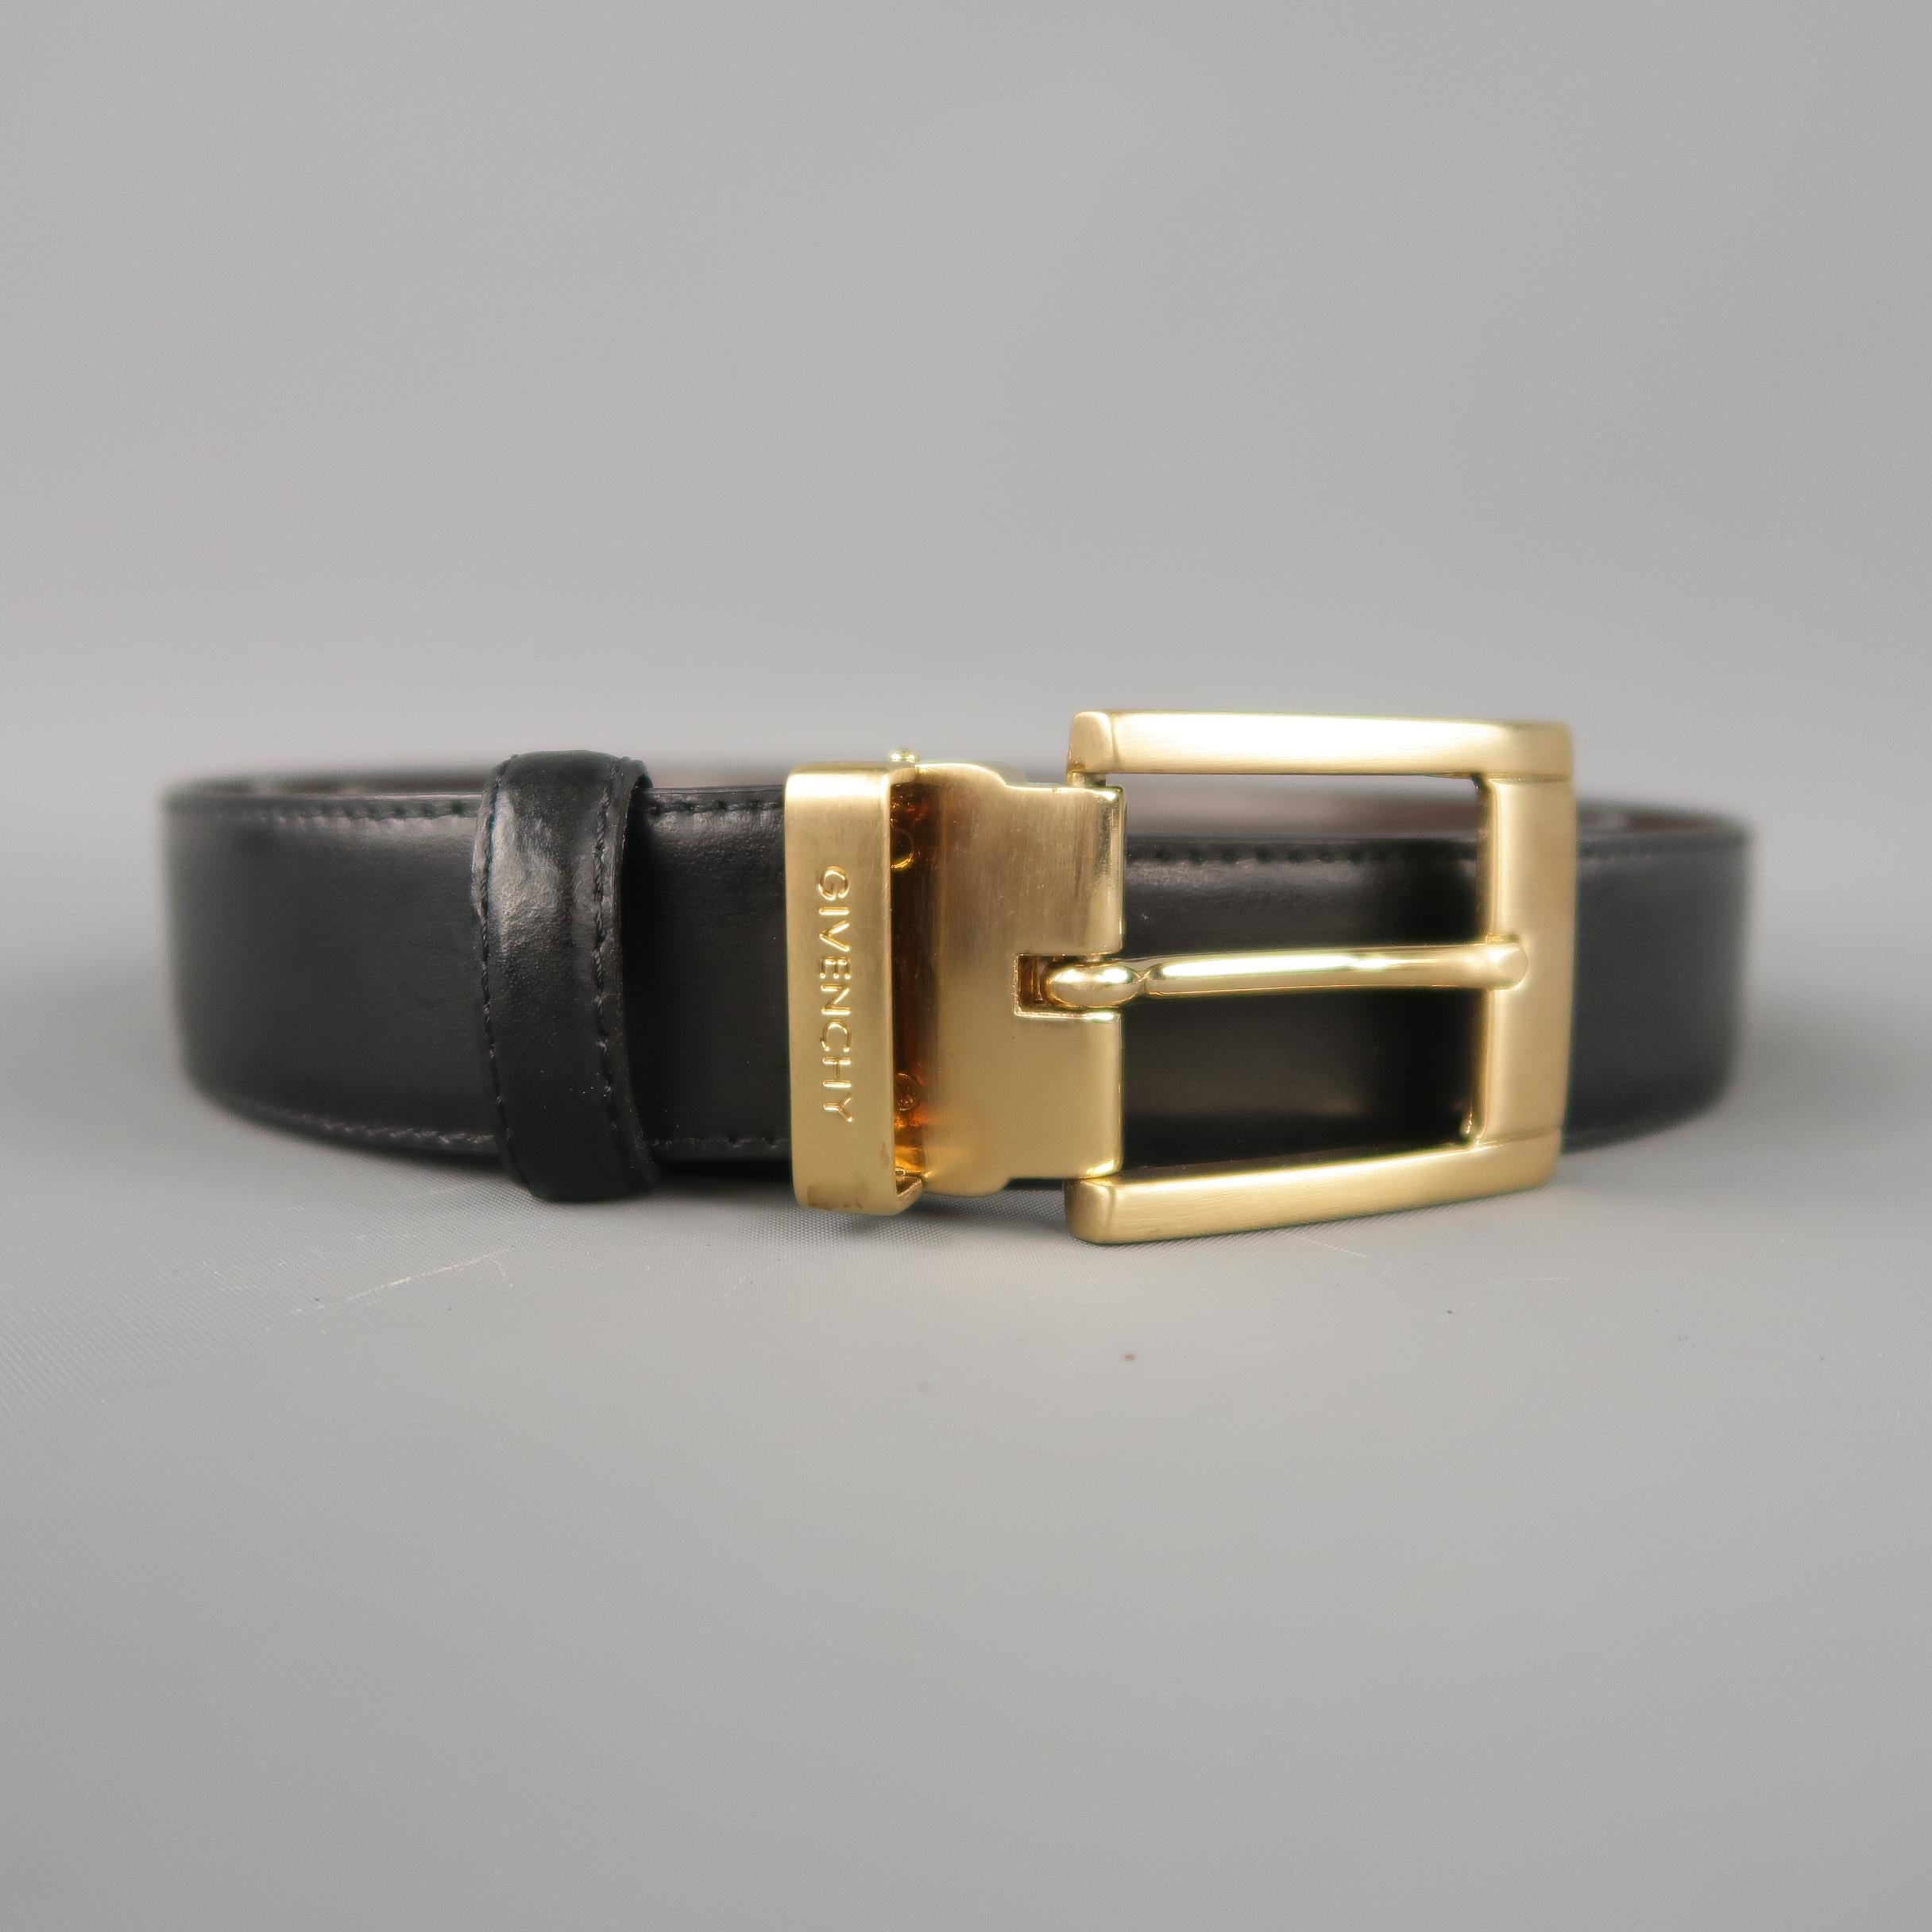 Vintage GIVENCHY dress belt features a dual tone brown and black reversible leather strap with a Gold tone metal buckle. Includes tags and both color loops. Made in Italy.
 
New with Tags.
Marked: (no size)
 
Length: 49 in.
Width: 1 in.
Fits: 41-45